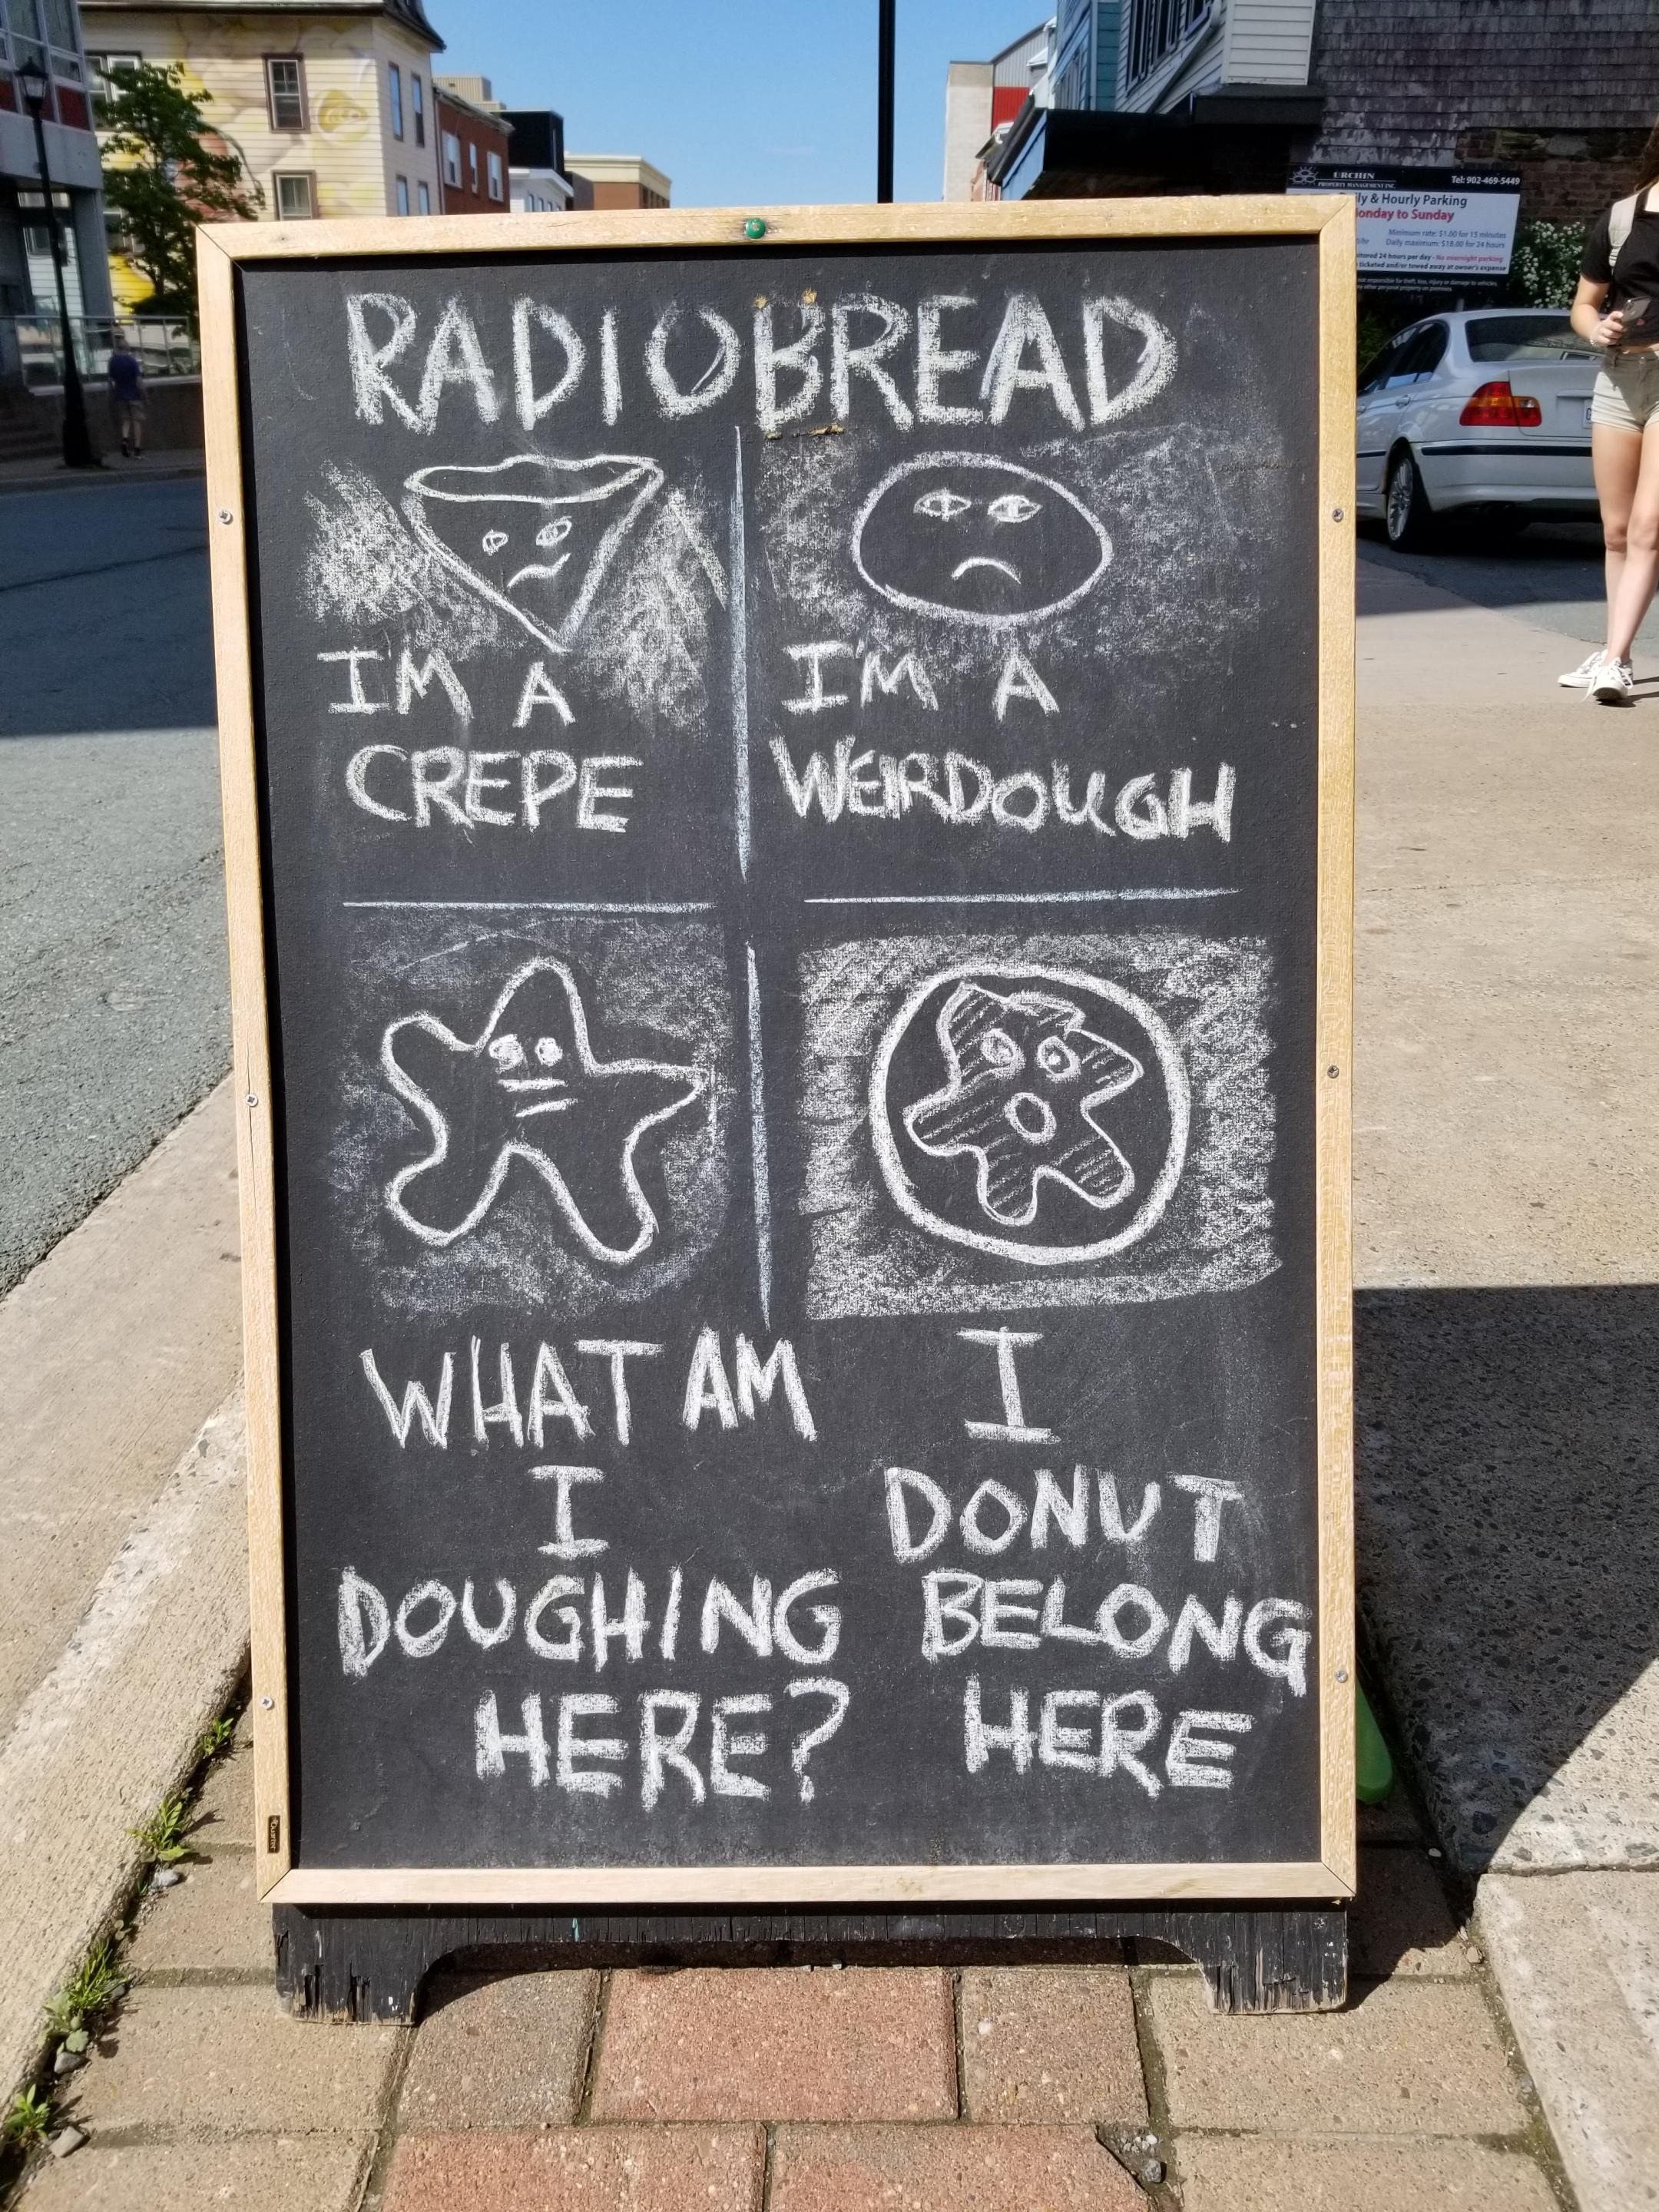 At my local creperie.